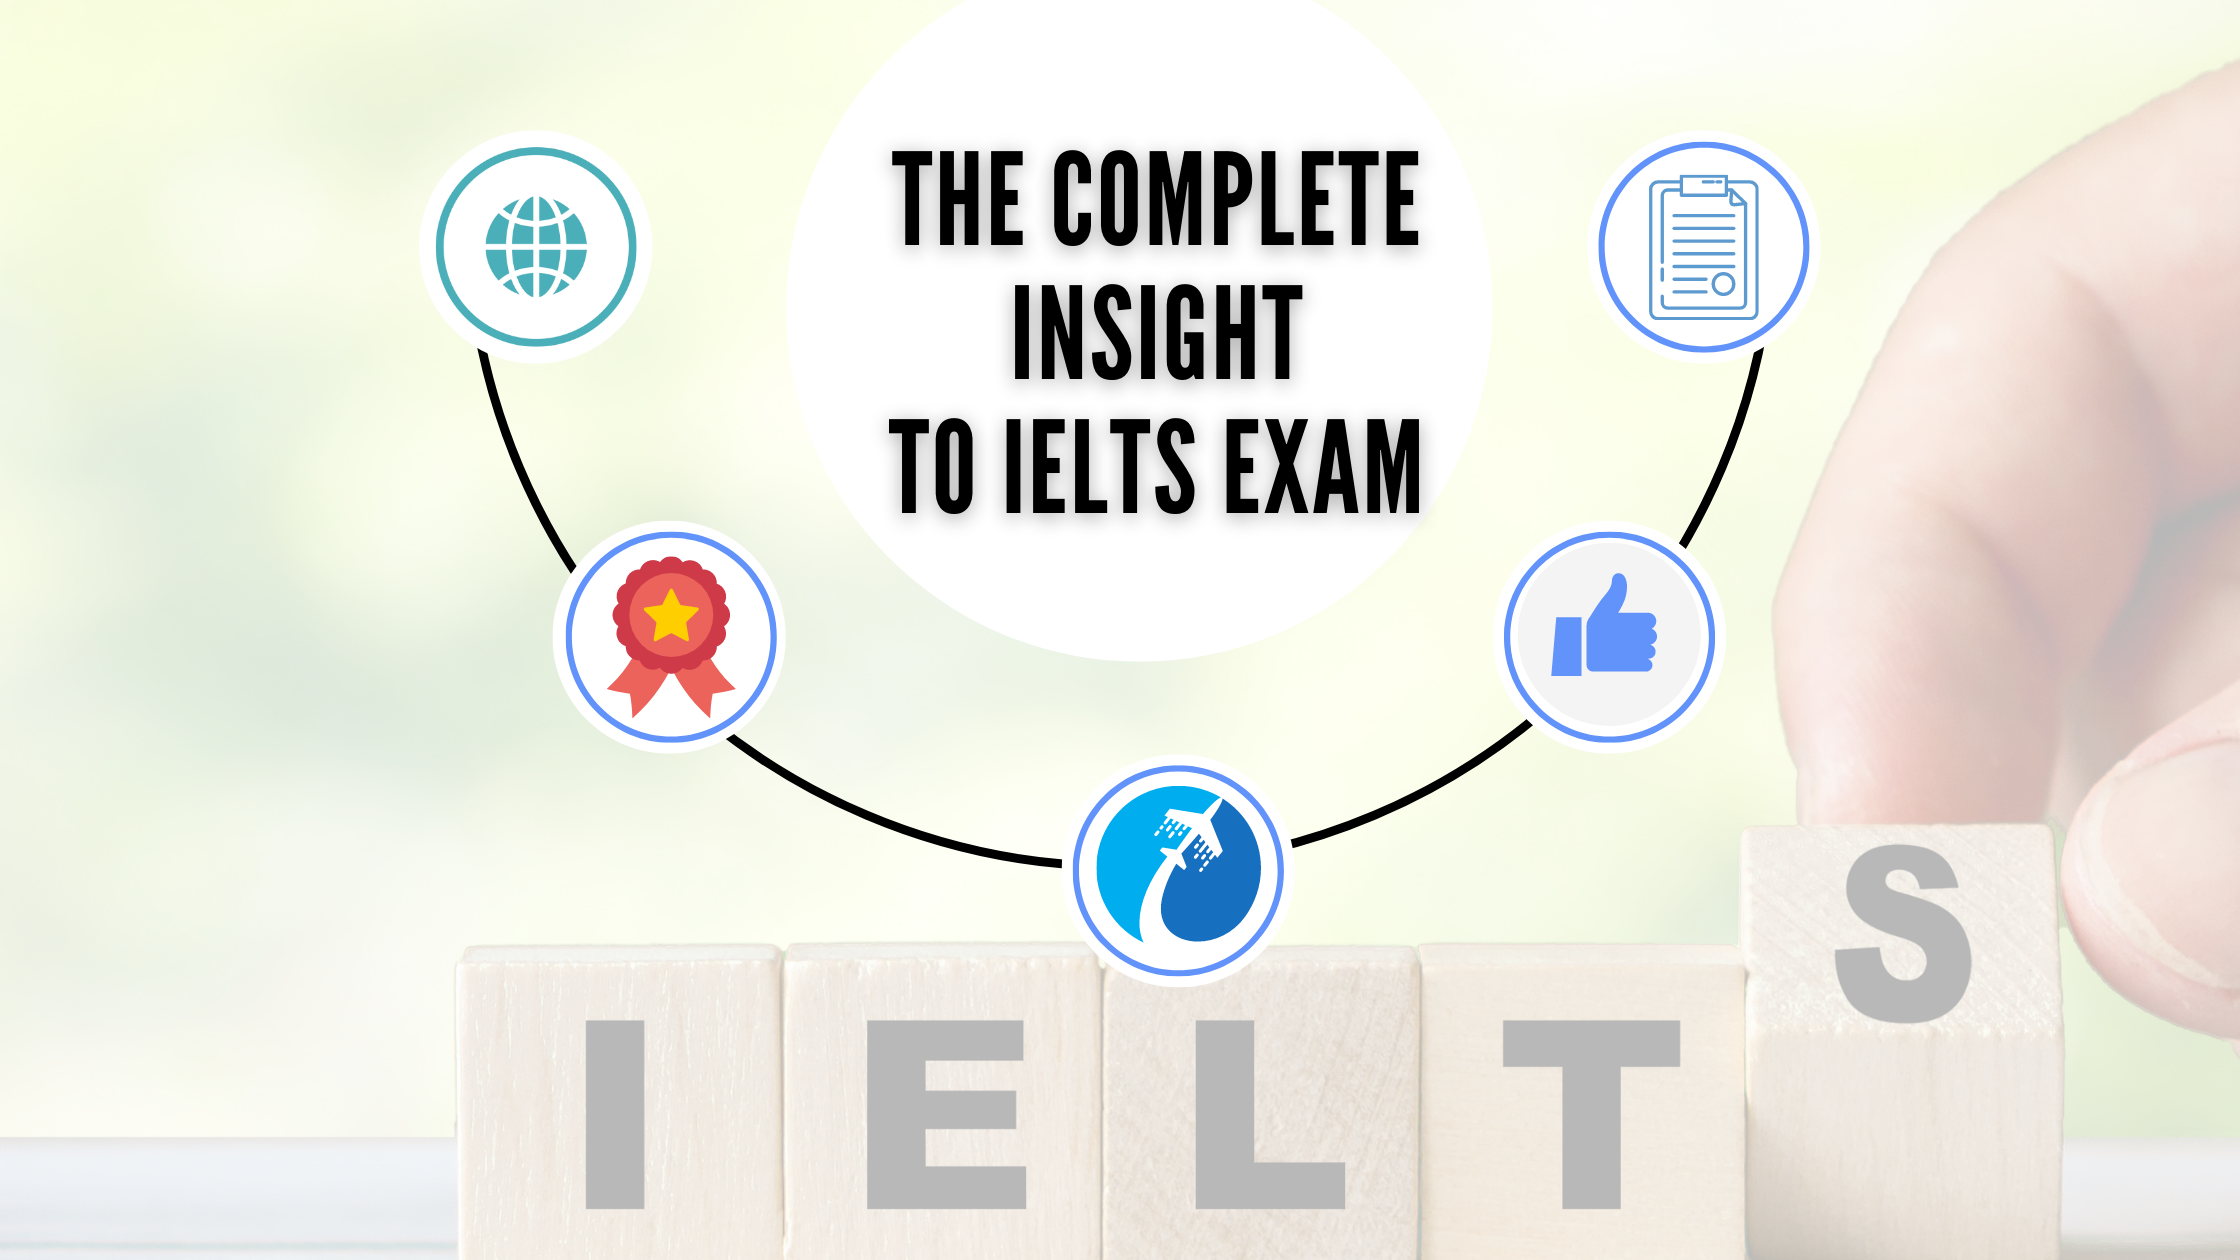 The Complete Insight To IELTS Exam - Everything You Need To Know